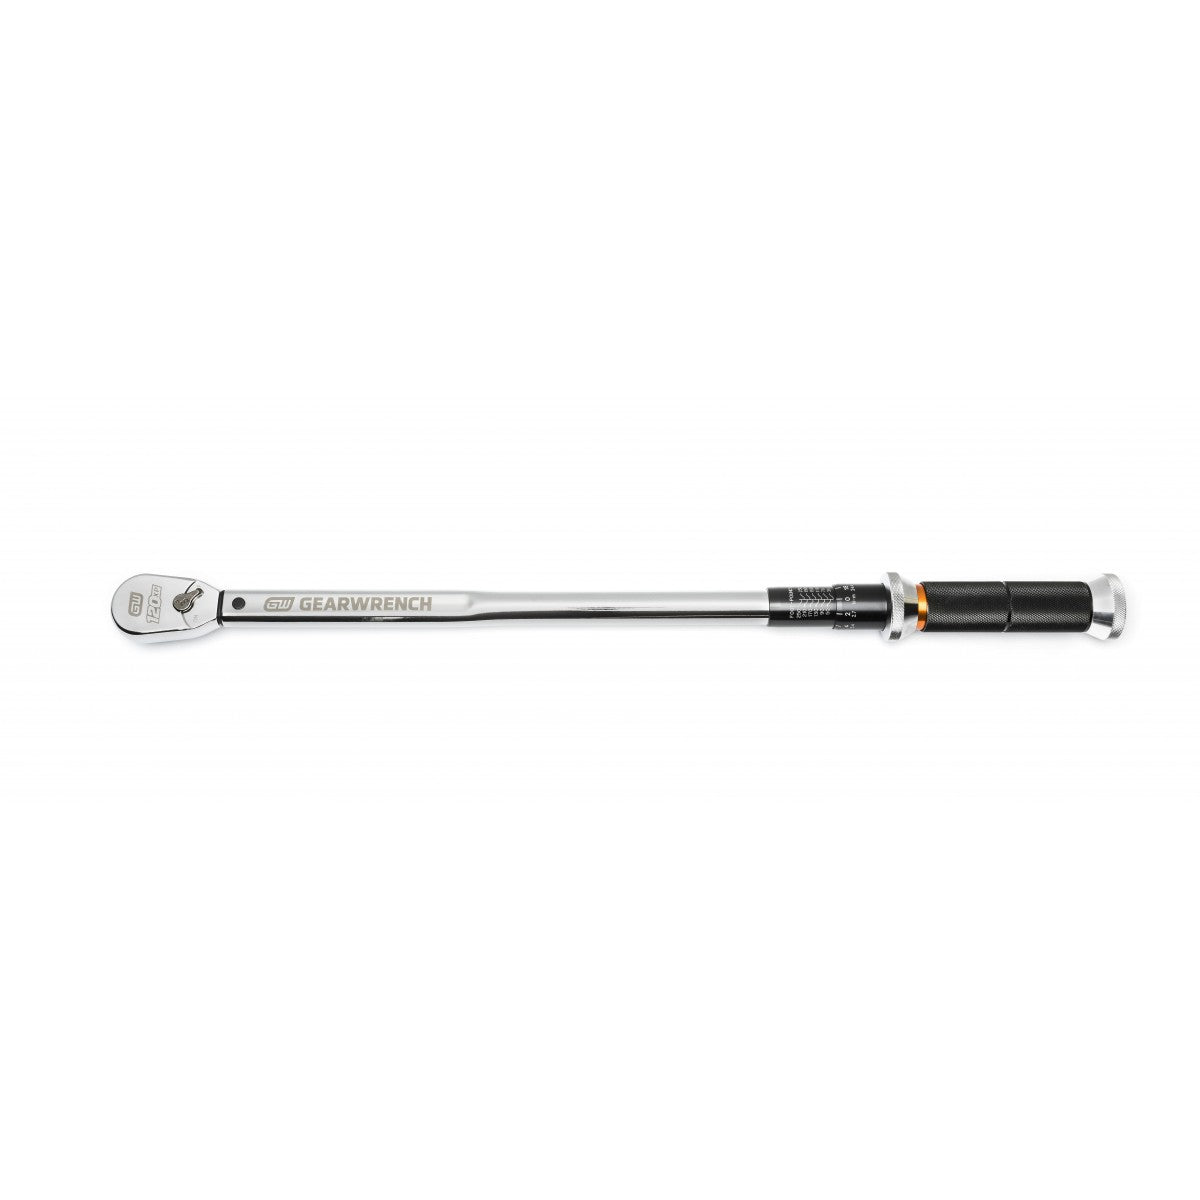 1/2" 120XP Micrometer Torque Wrench 85181 by Gearwrench